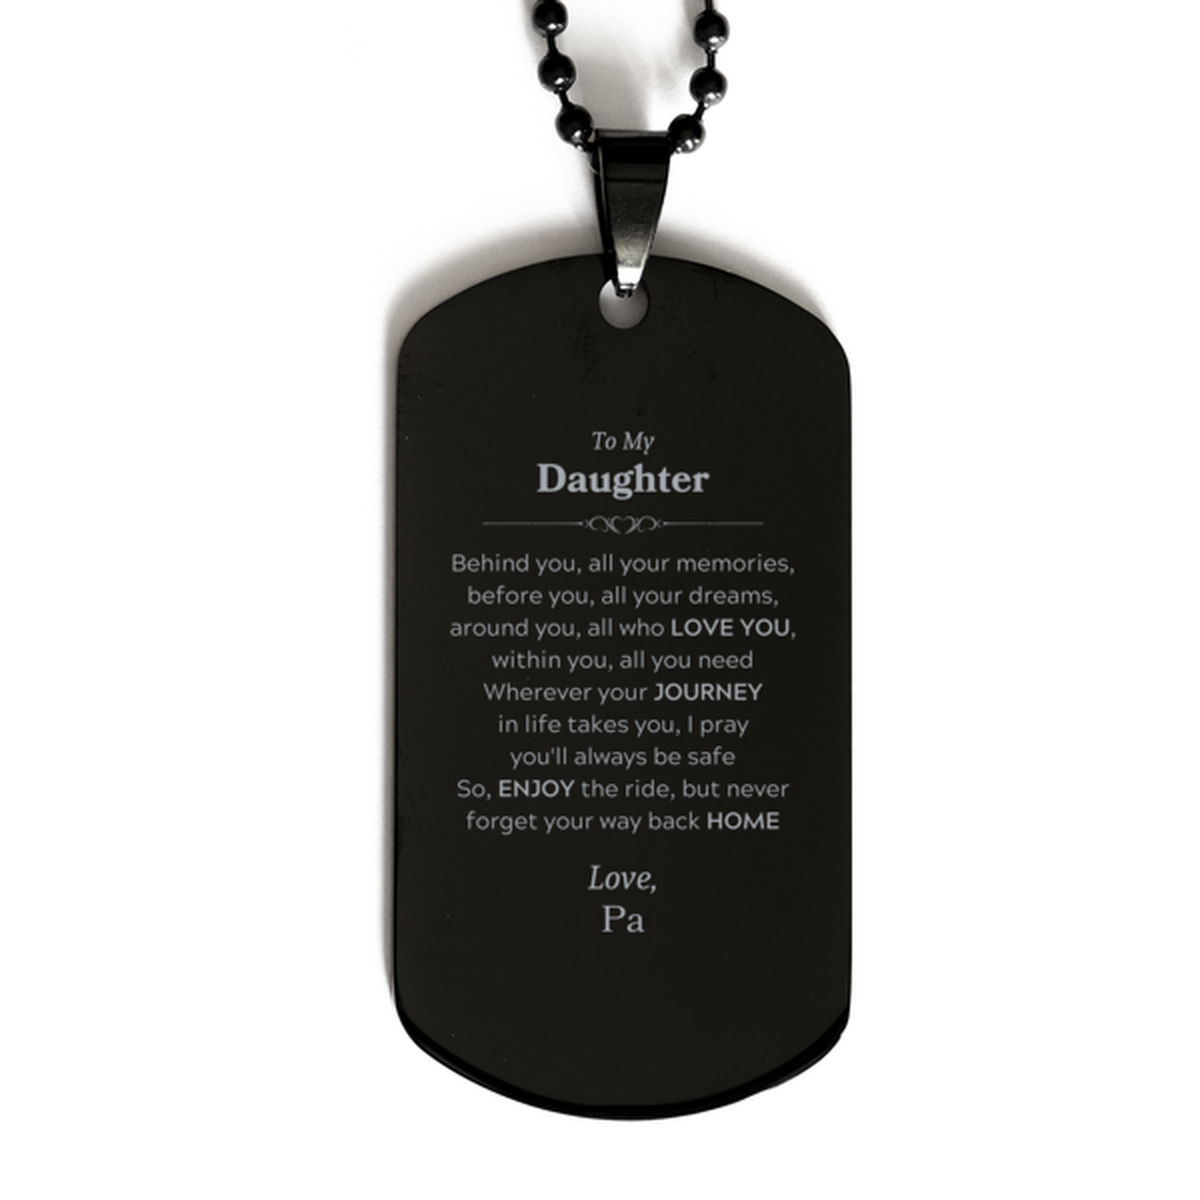 To My Daughter Graduation Gifts from Pa, Daughter Black Dog Tag Christmas Birthday Gifts for Daughter Behind you, all your memories, before you, all your dreams. Love, Pa